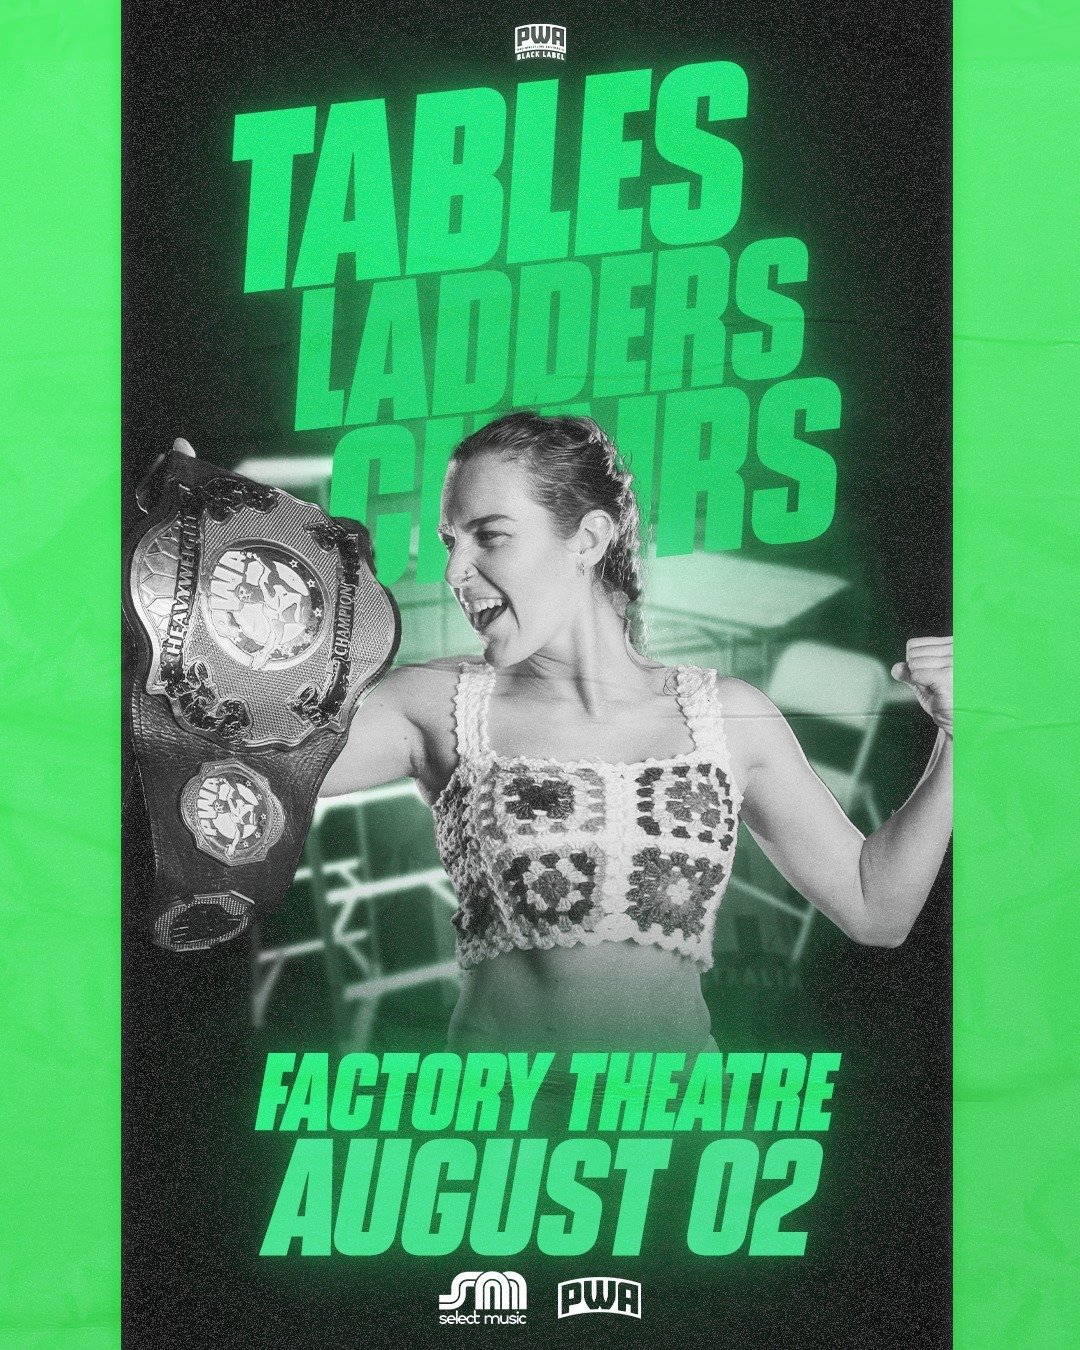 🚨 TICKET ALERT 🎟️🚨

PWA Black Label Presents: Shoots &amp; Ladders featuring a TABLES, LADDERS &amp; CHAIRS MATCH at the Factory Theatre, August 2

GET TICKETS NOW 🎟️⬇️
https://tinyurl.com/PWATLCTIX